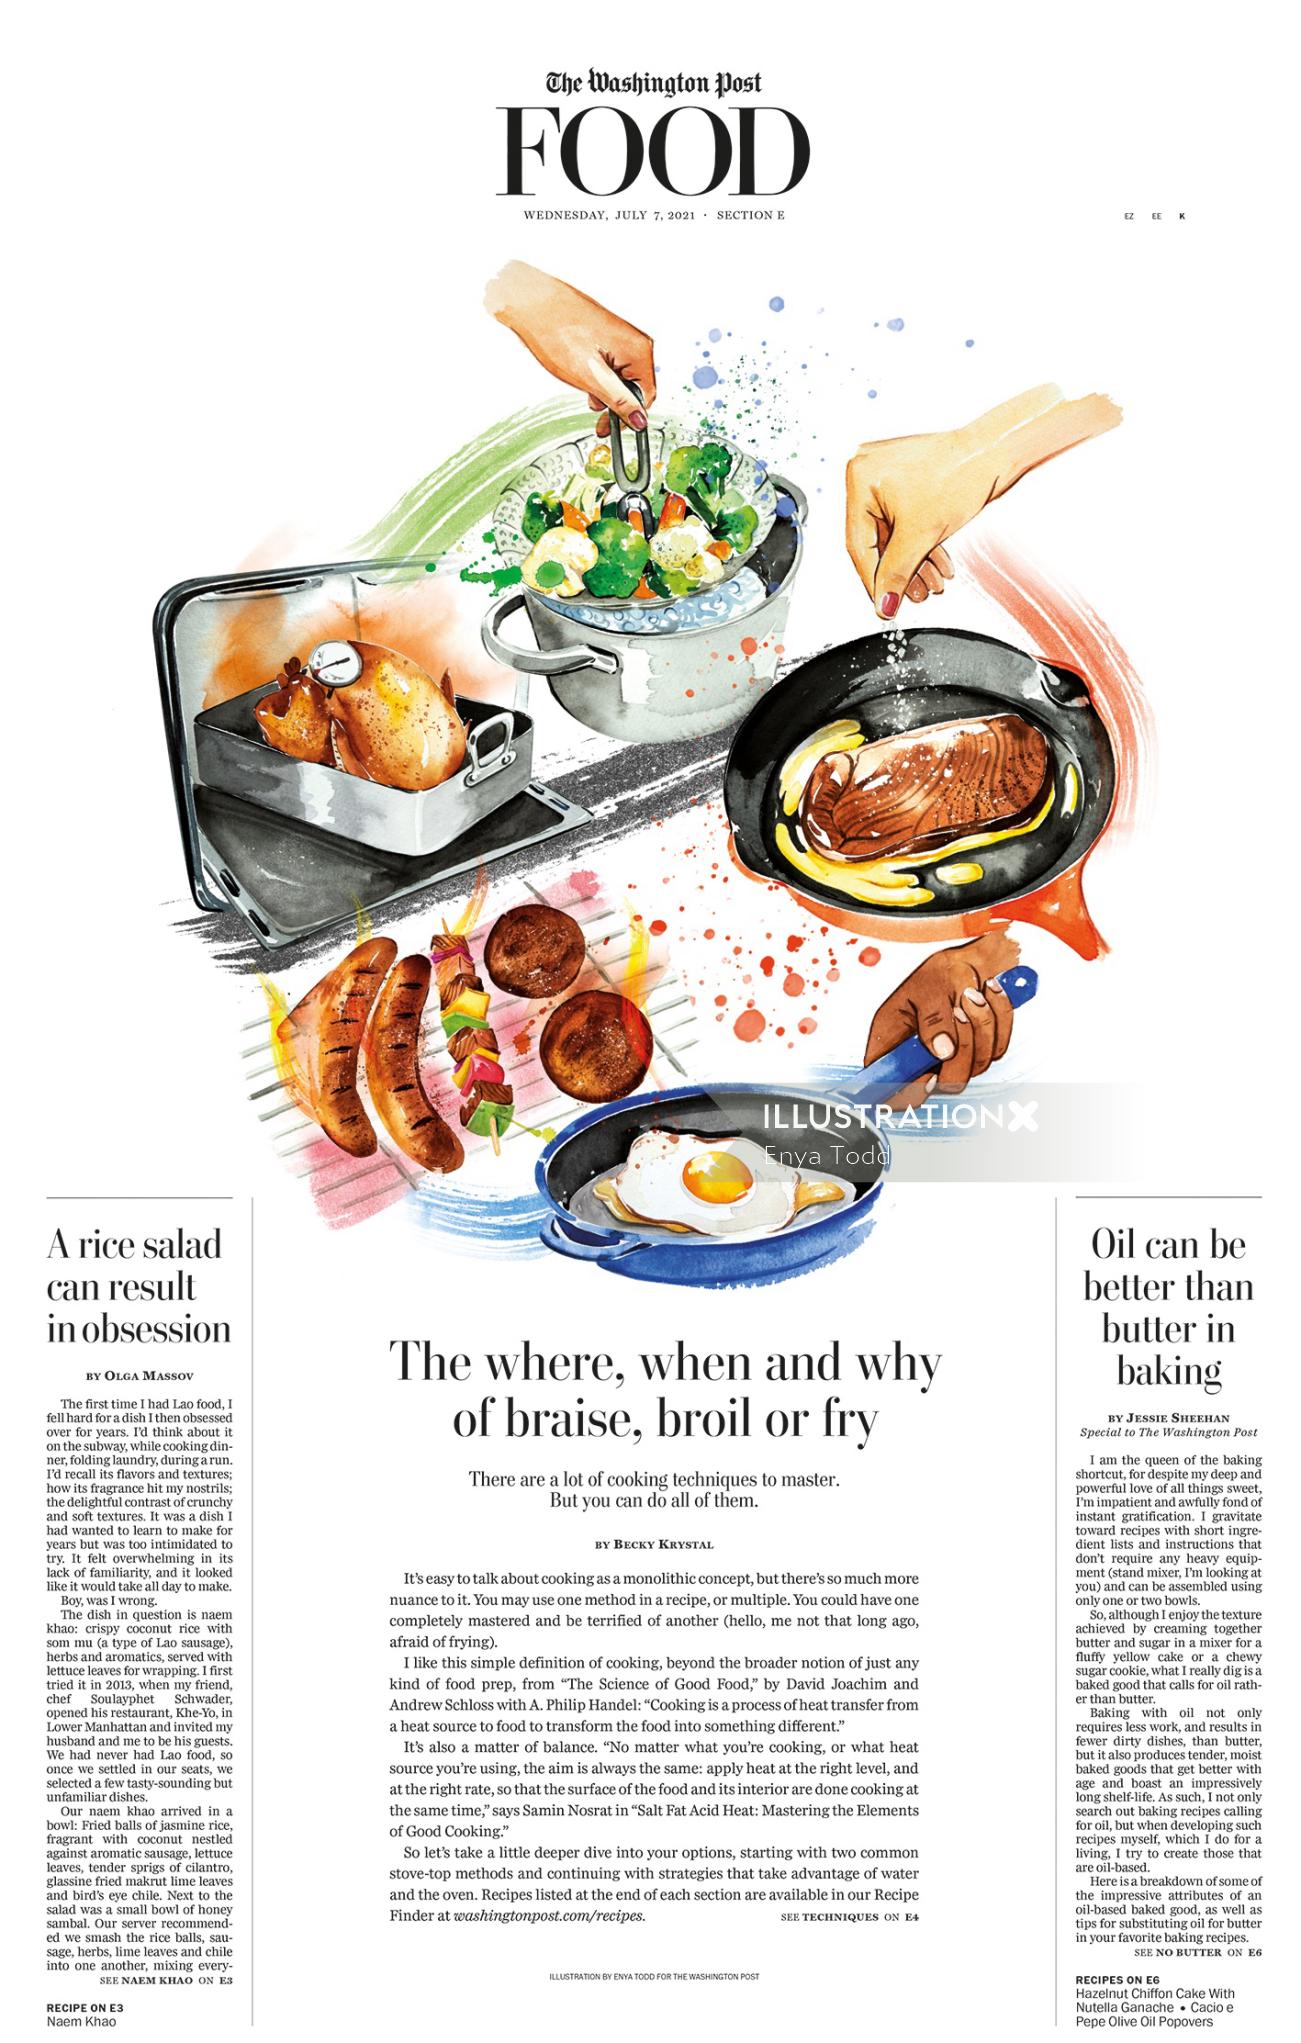 Editorial illustration on cooking techniques 